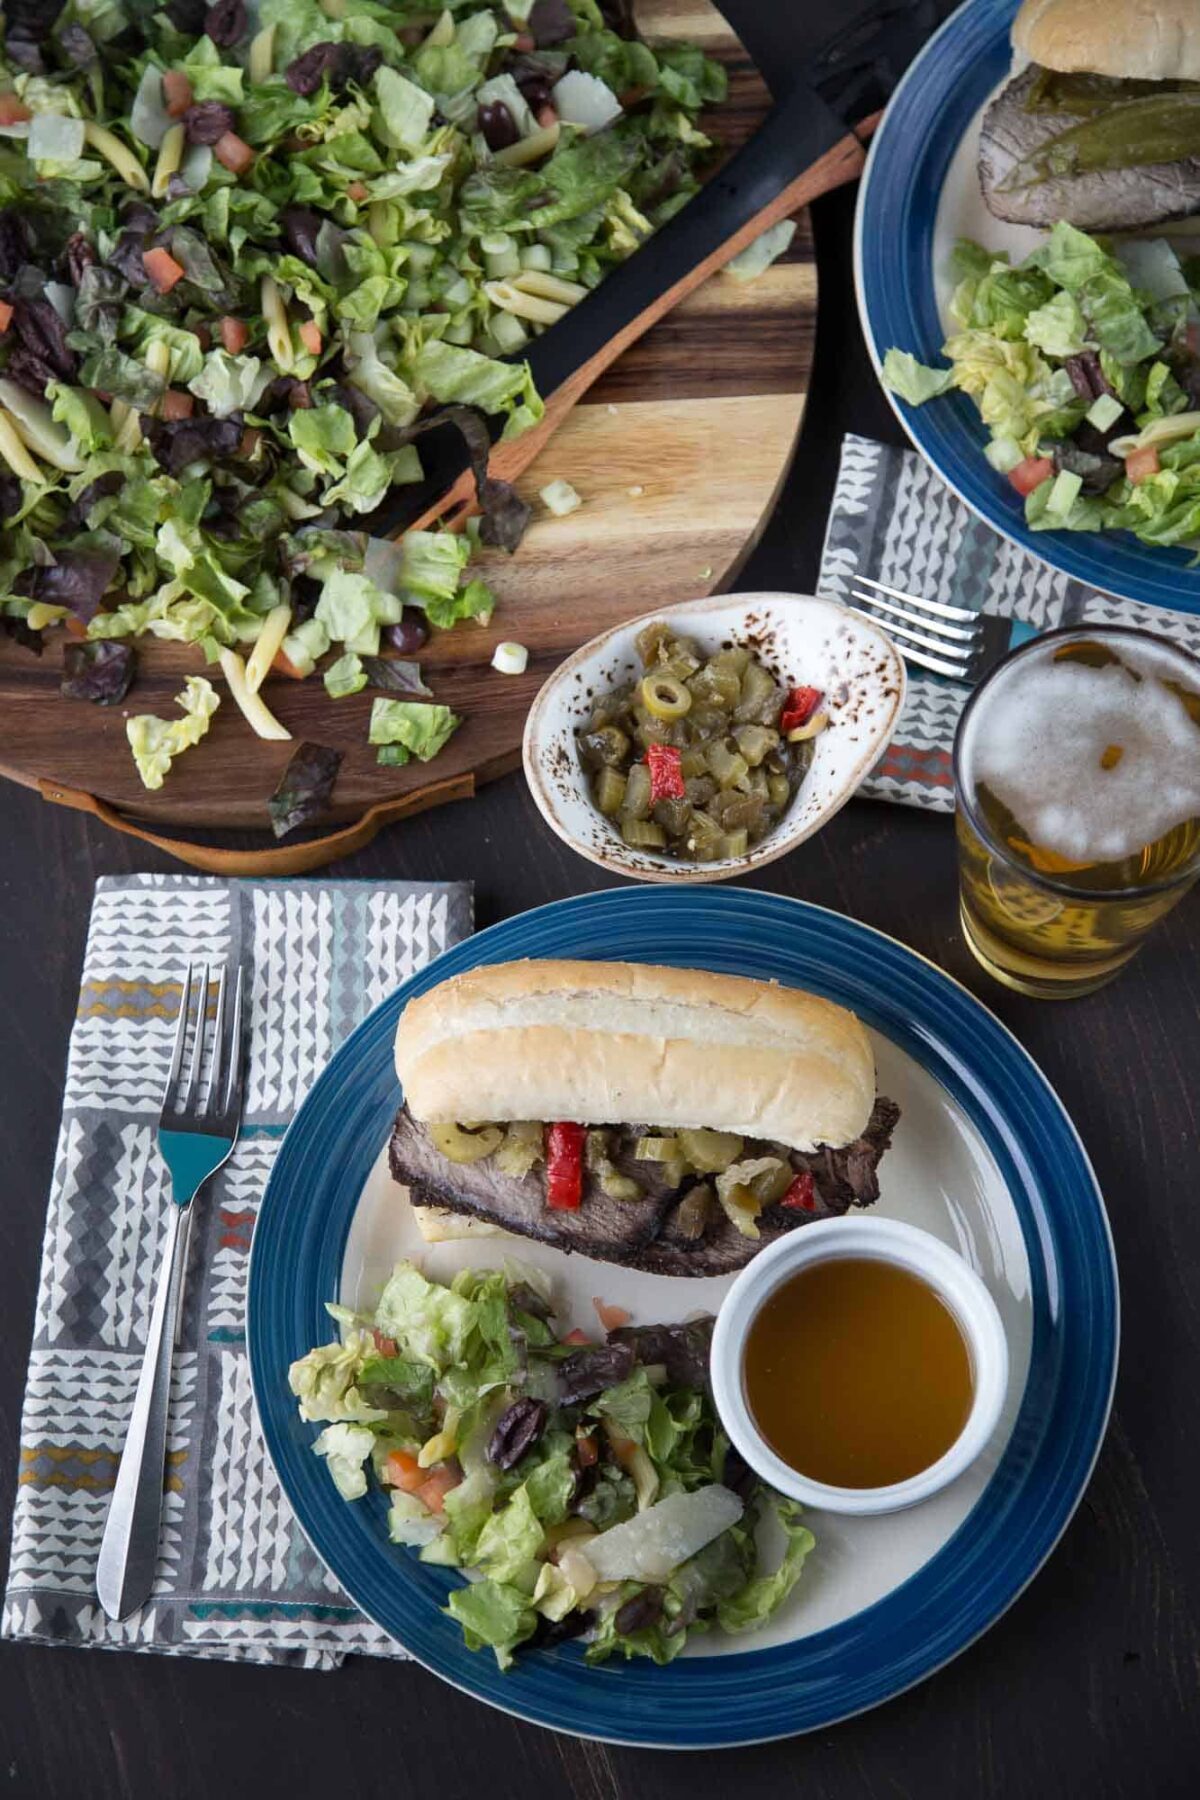 dinner table with italian beef sandwiches, a leafy green salad, and sides of giardiniera and au jus.